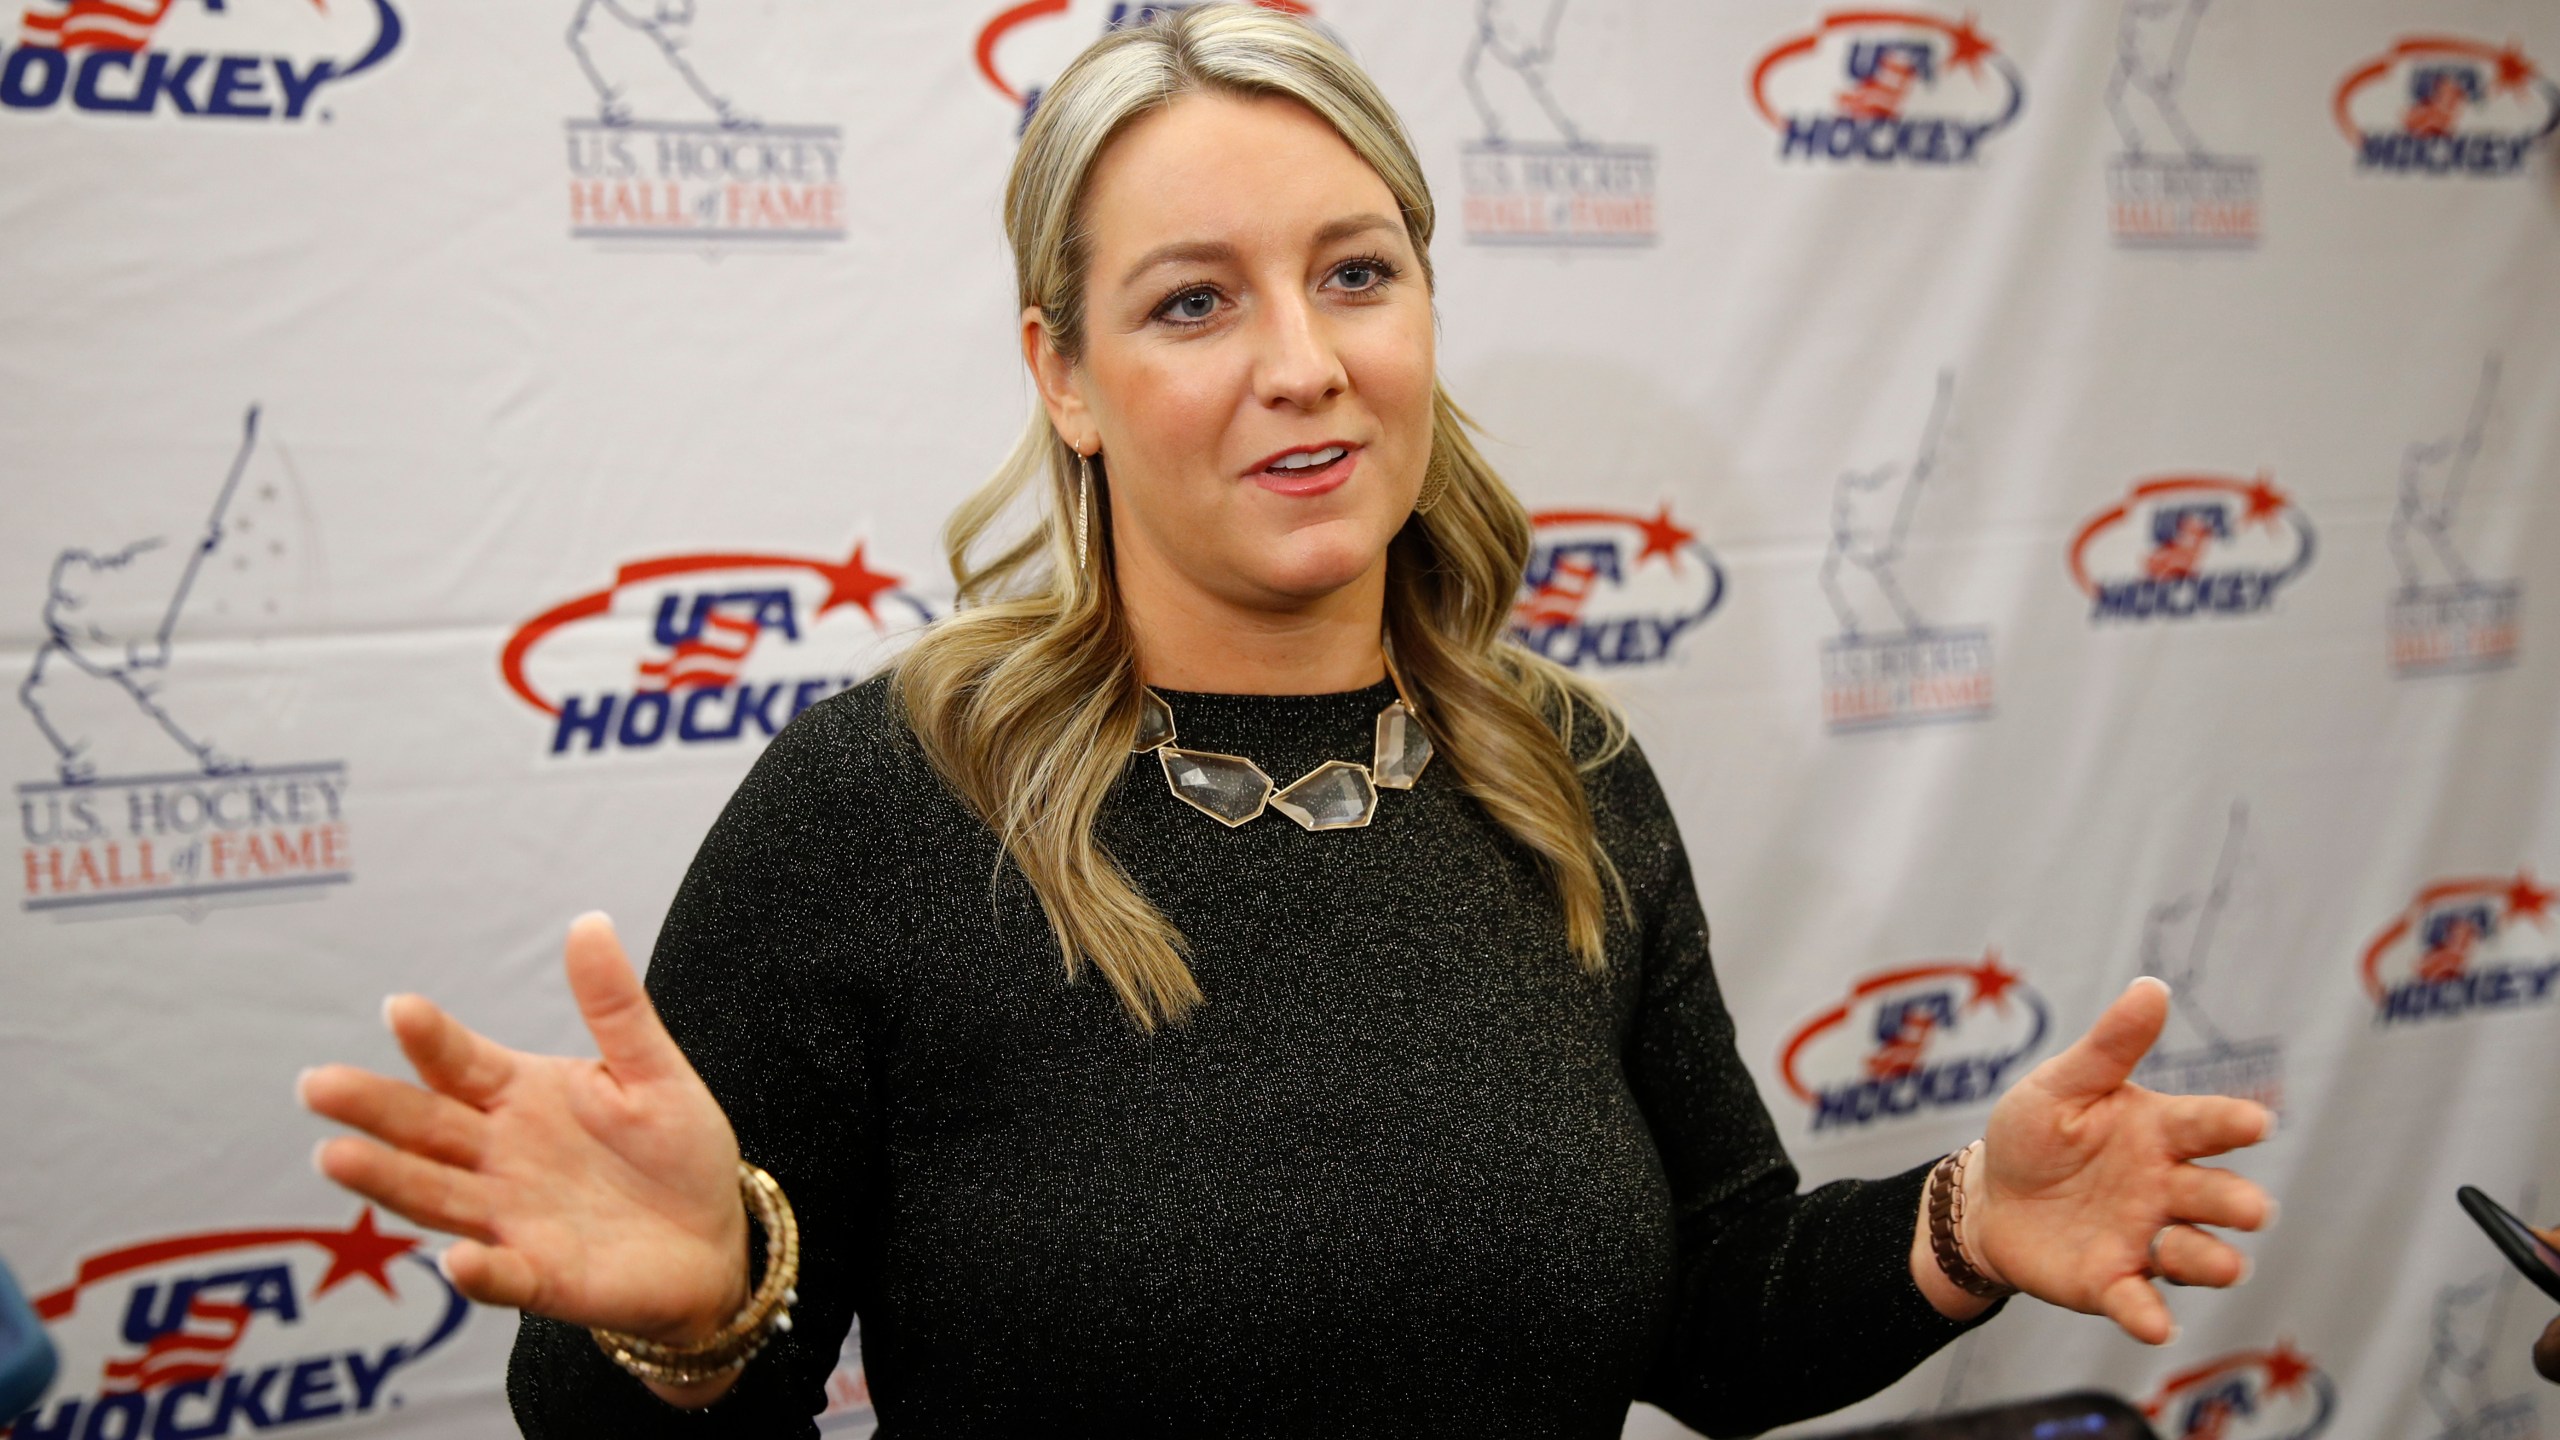 FILE - Olympic medalist Krissy Wendell speaks with members of the media before being inducted into the U.S. Hockey Hall of Fame, Thursday, Dec. 12, 2019, in Washington. Wendell is part of the Hall of Fame class of 2024. (AP Photo/Patrick Semansky, File)